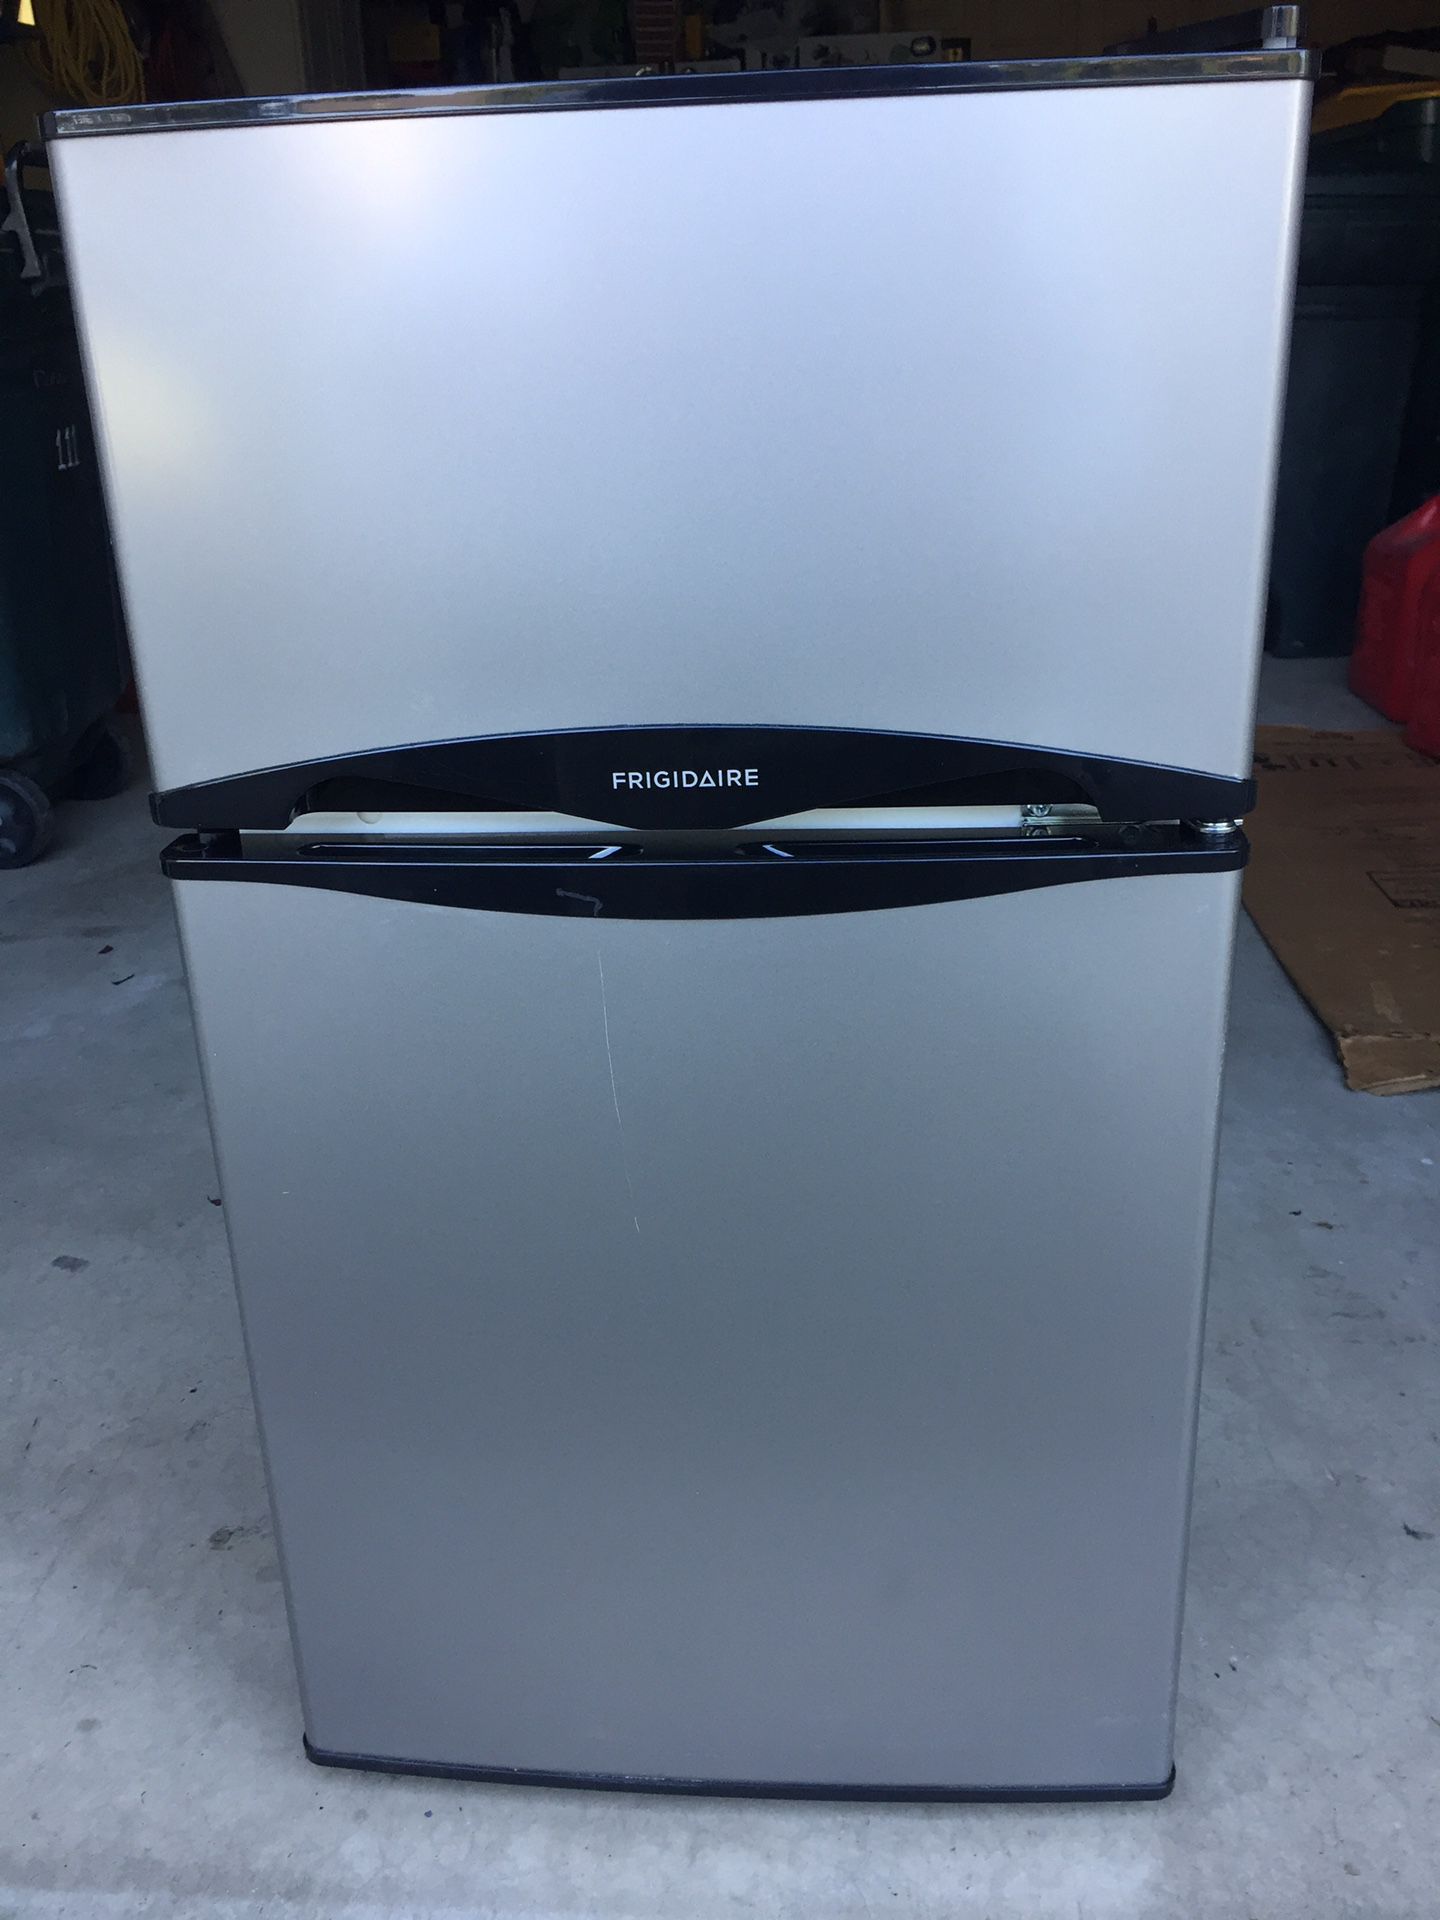 Nearly new 3.1 Cu ft Frigidaire Freezer/Refrigerator. Used 3 months. Paid $259.00. Sell for $175.00